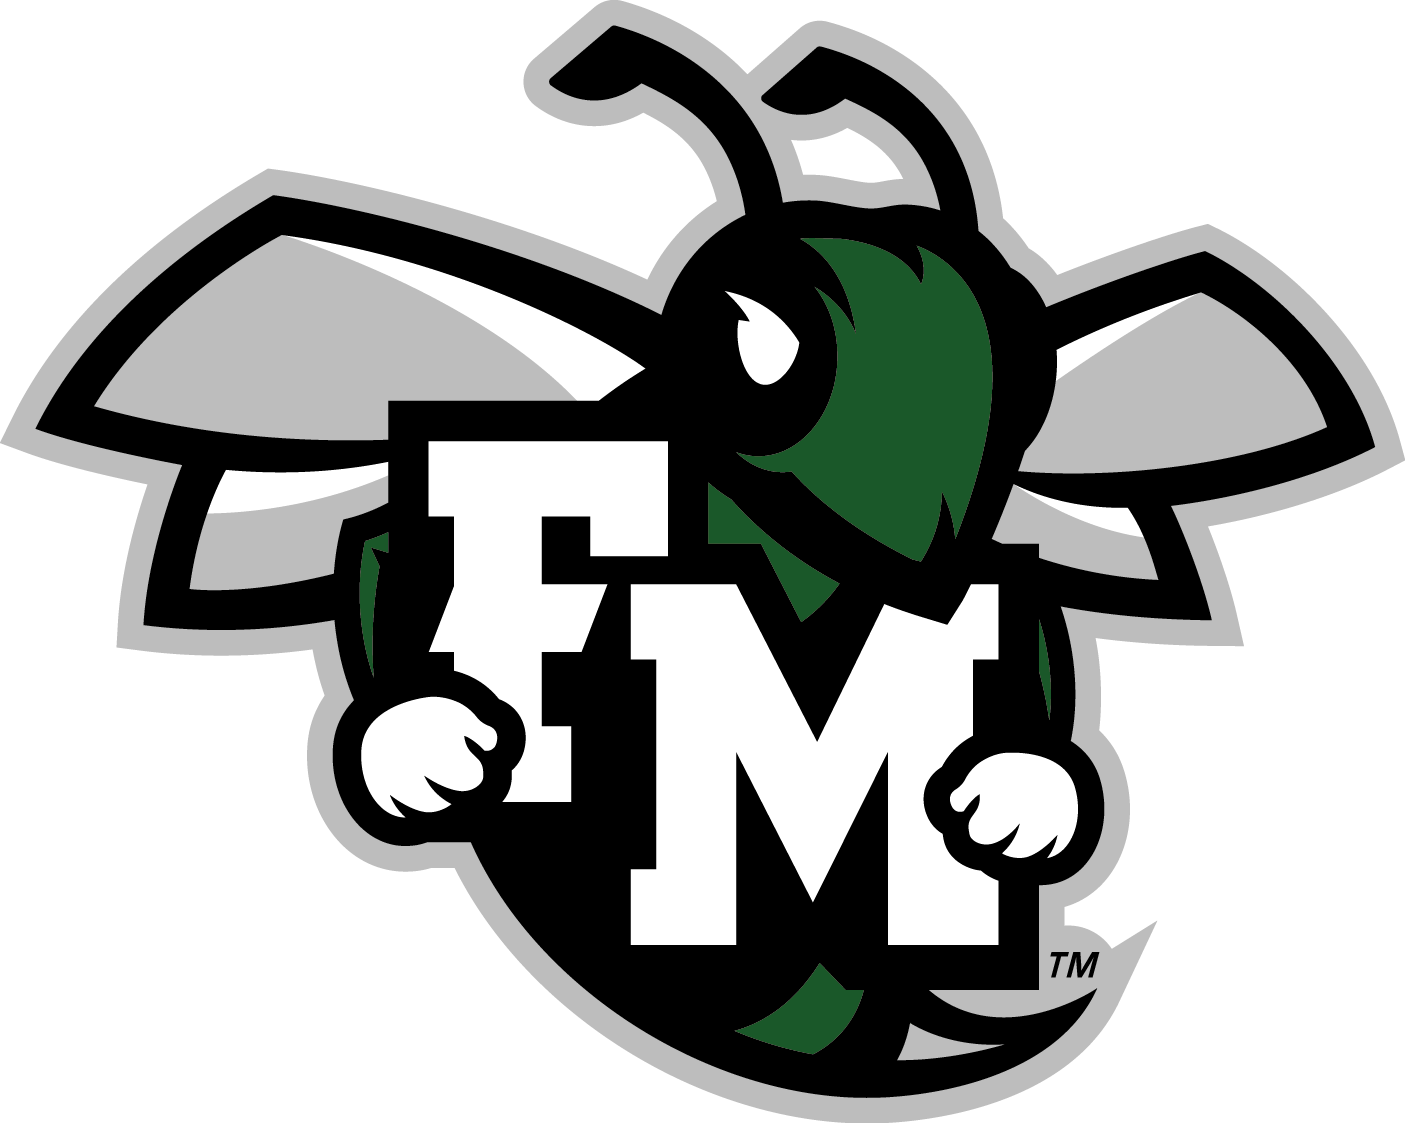 This is an image of the F-M athletics logo - a hornet holding the letters F and M.